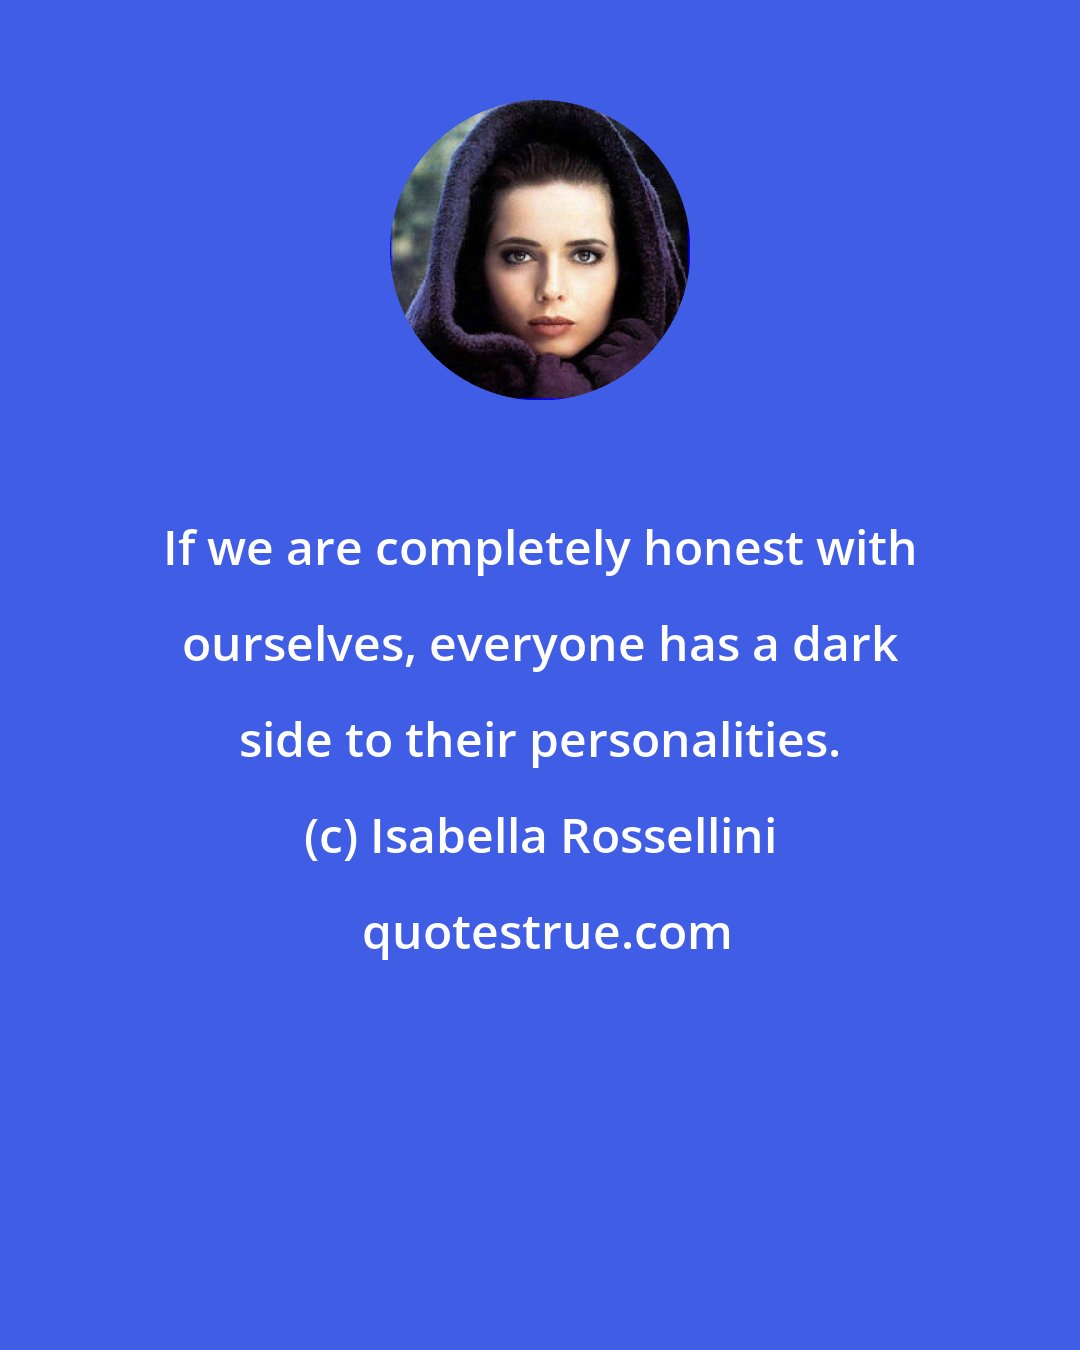 Isabella Rossellini: If we are completely honest with ourselves, everyone has a dark side to their personalities.